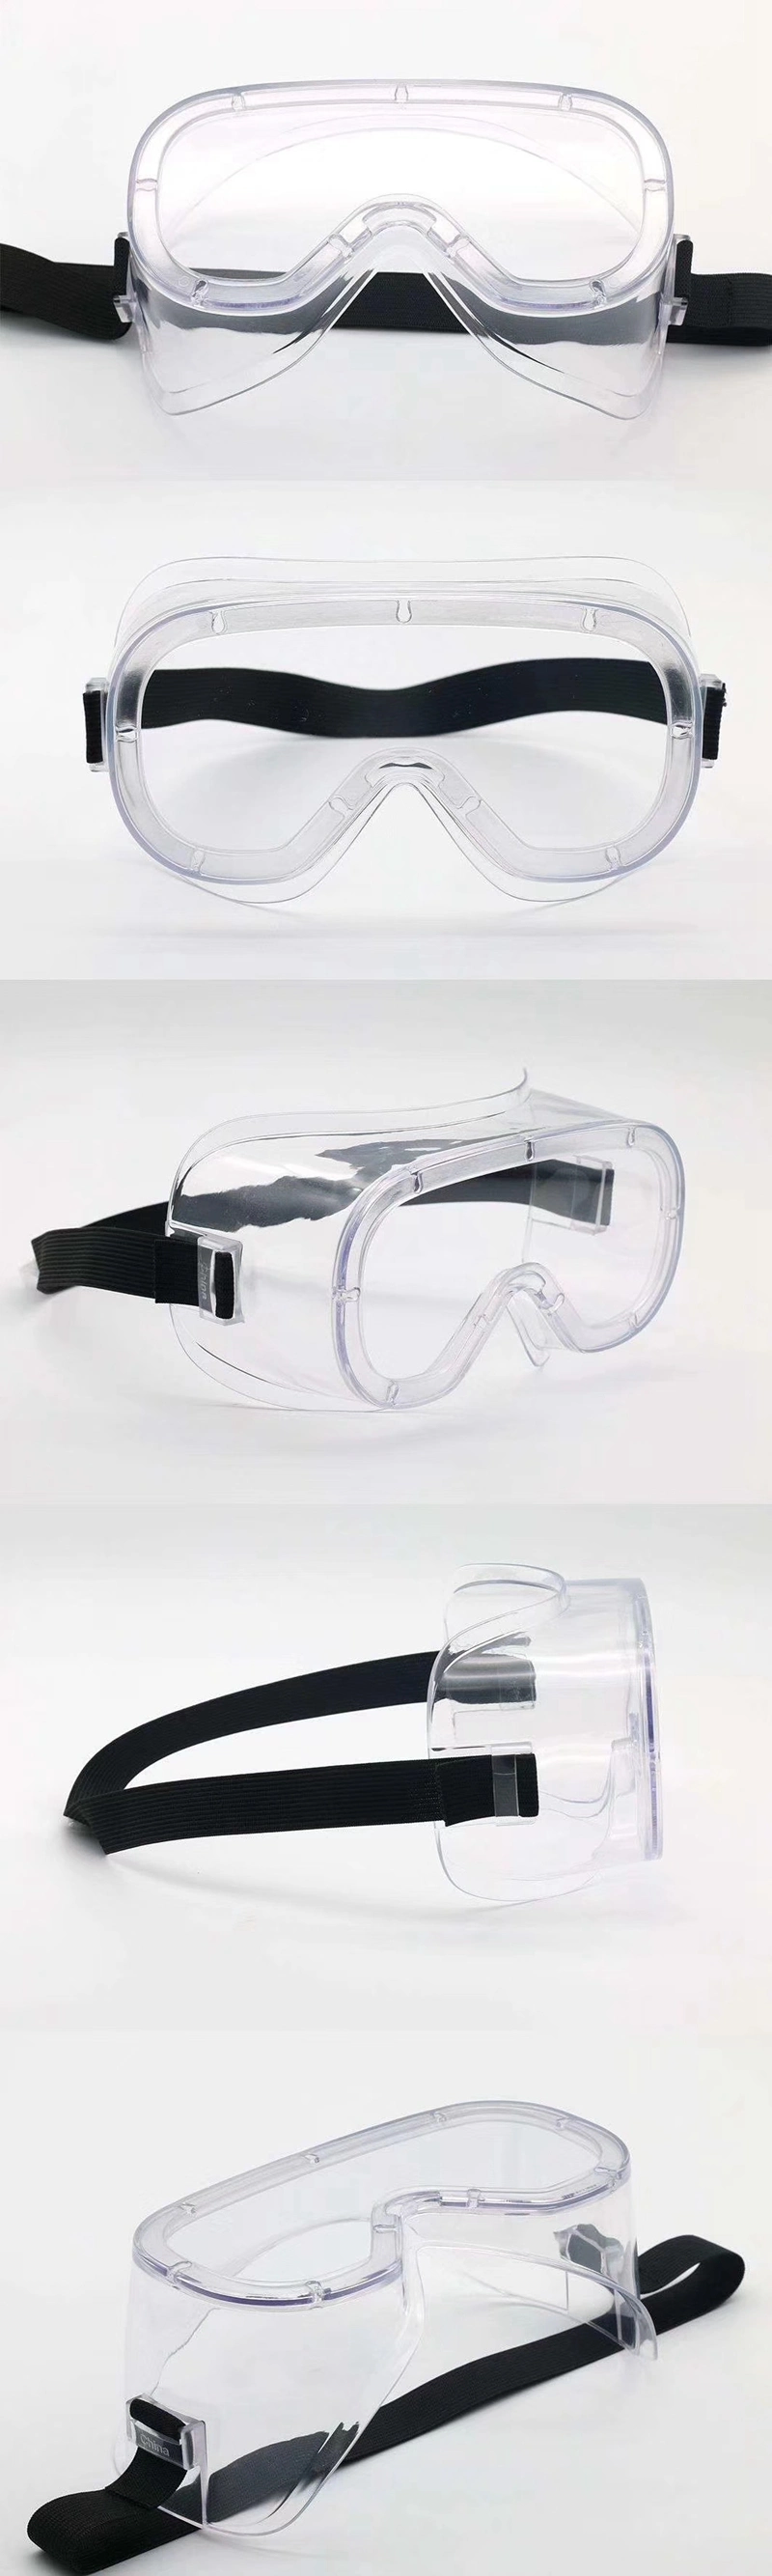 Medical Protective Goggles Safety Glasses Goggles China Safety Goggles